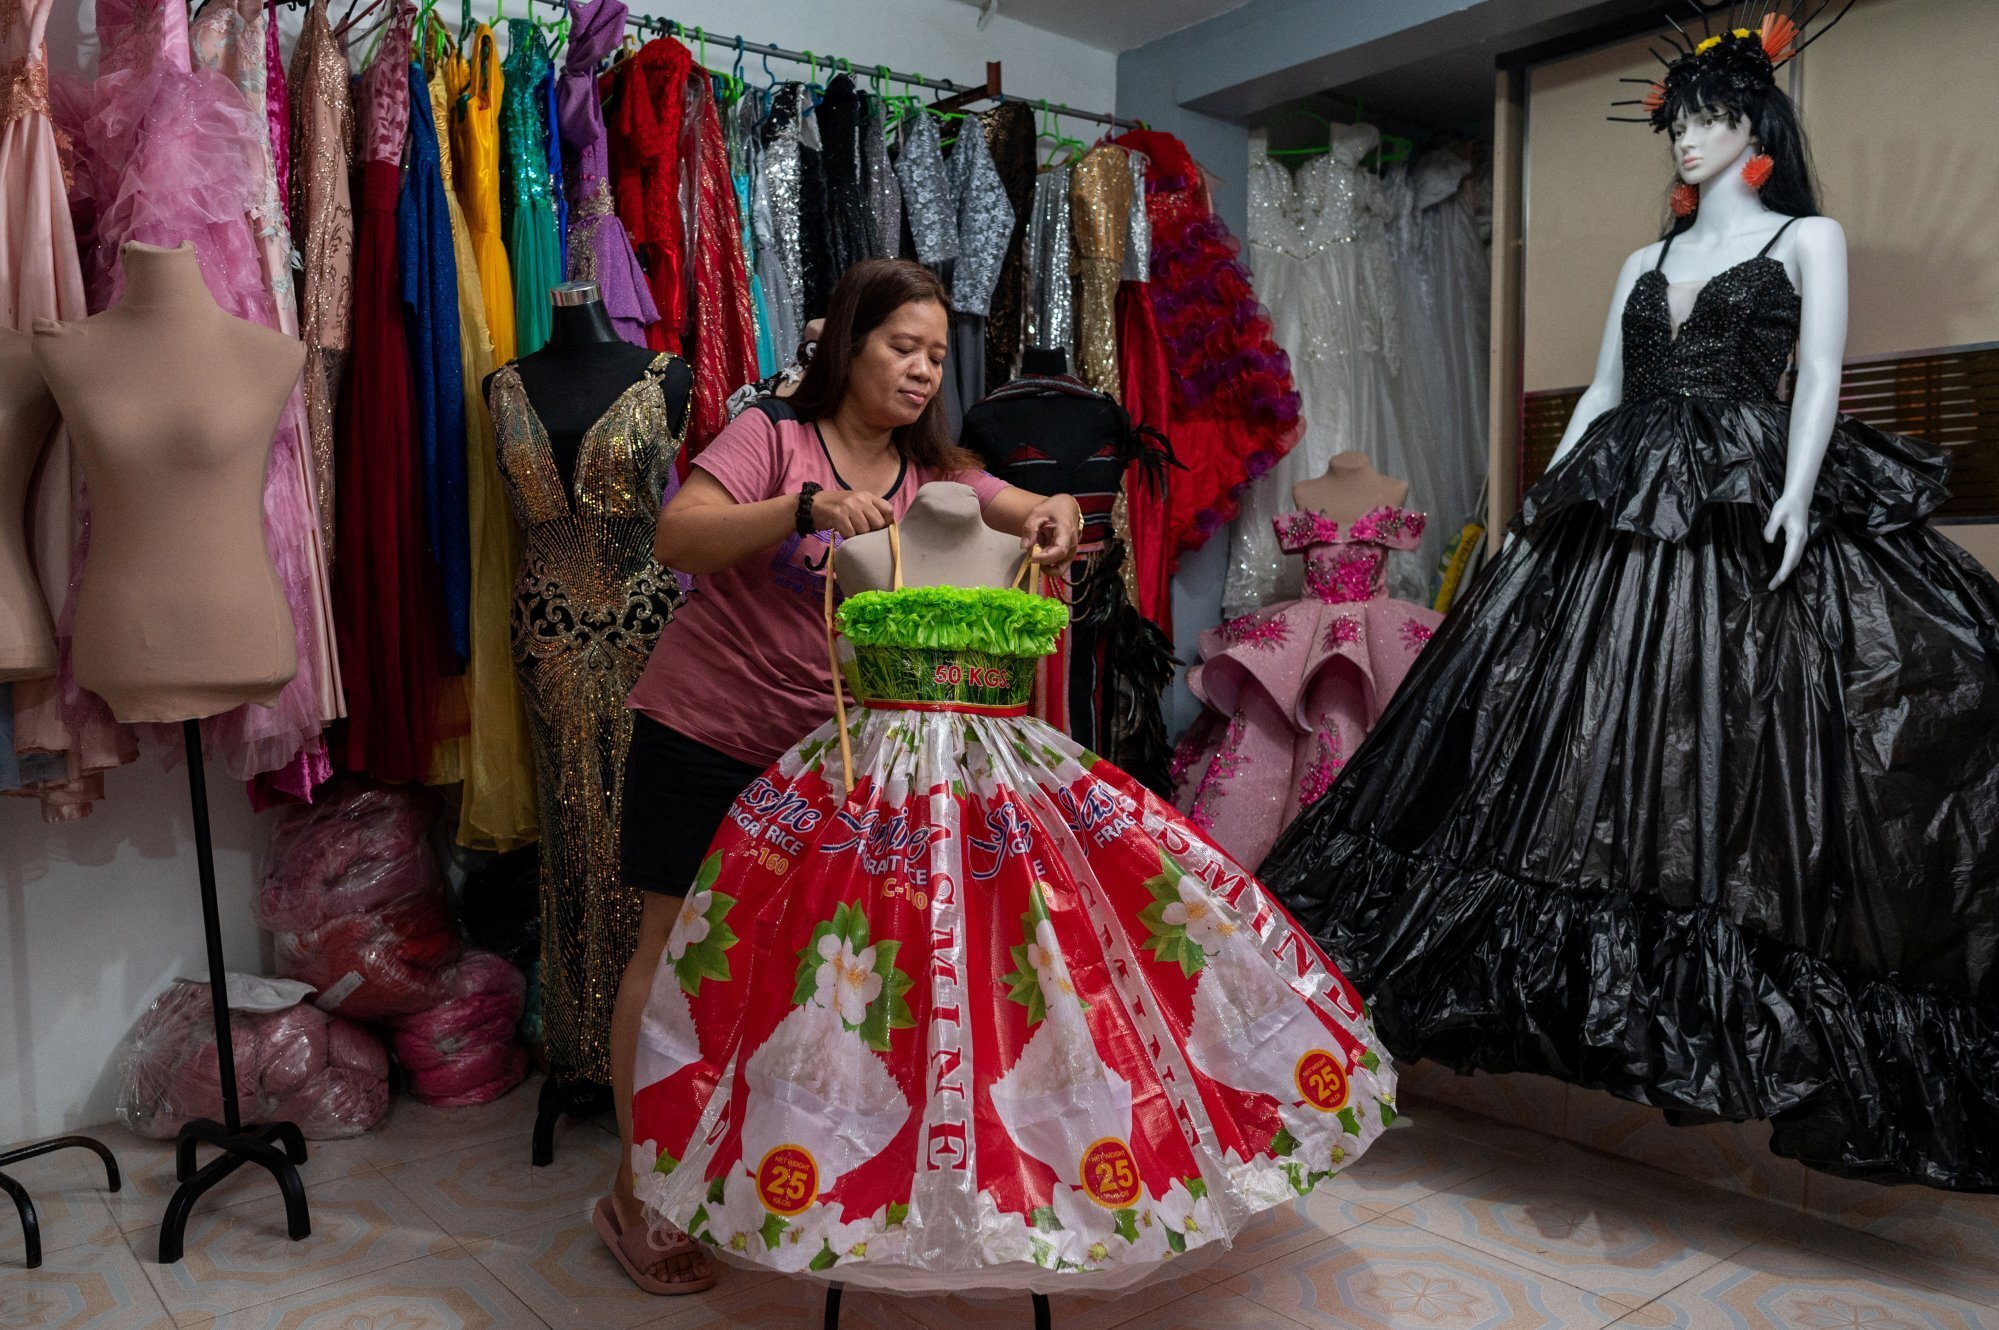 Gowns made from plastic waste, newspapers and rice sacks - Philippine dress  maker is in demand for birthdays, weddings and beauty pageants